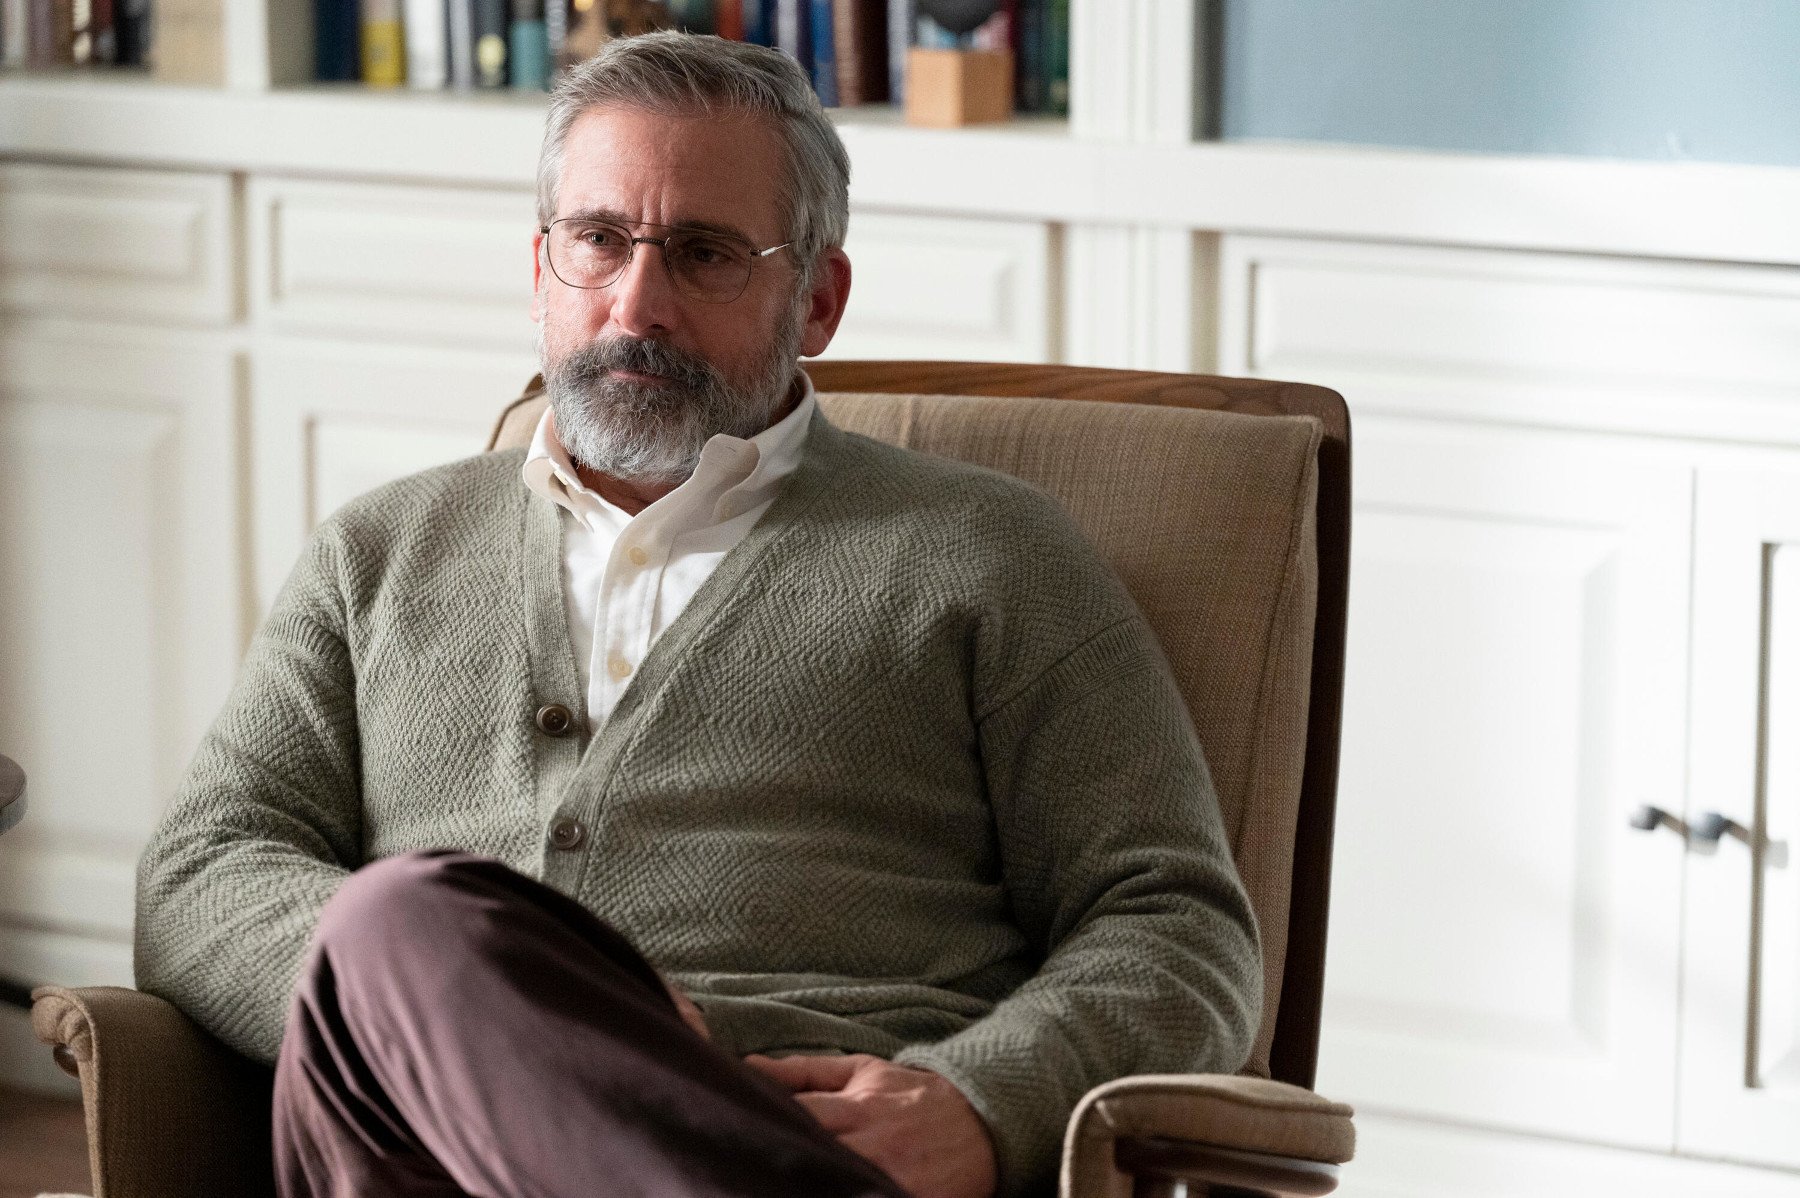 Steve Carell as Alan Strauss in 'The Patient' for our article about episode 7. He's sitting in a chair, wearing a cardigan sweater, and crossing his legs.